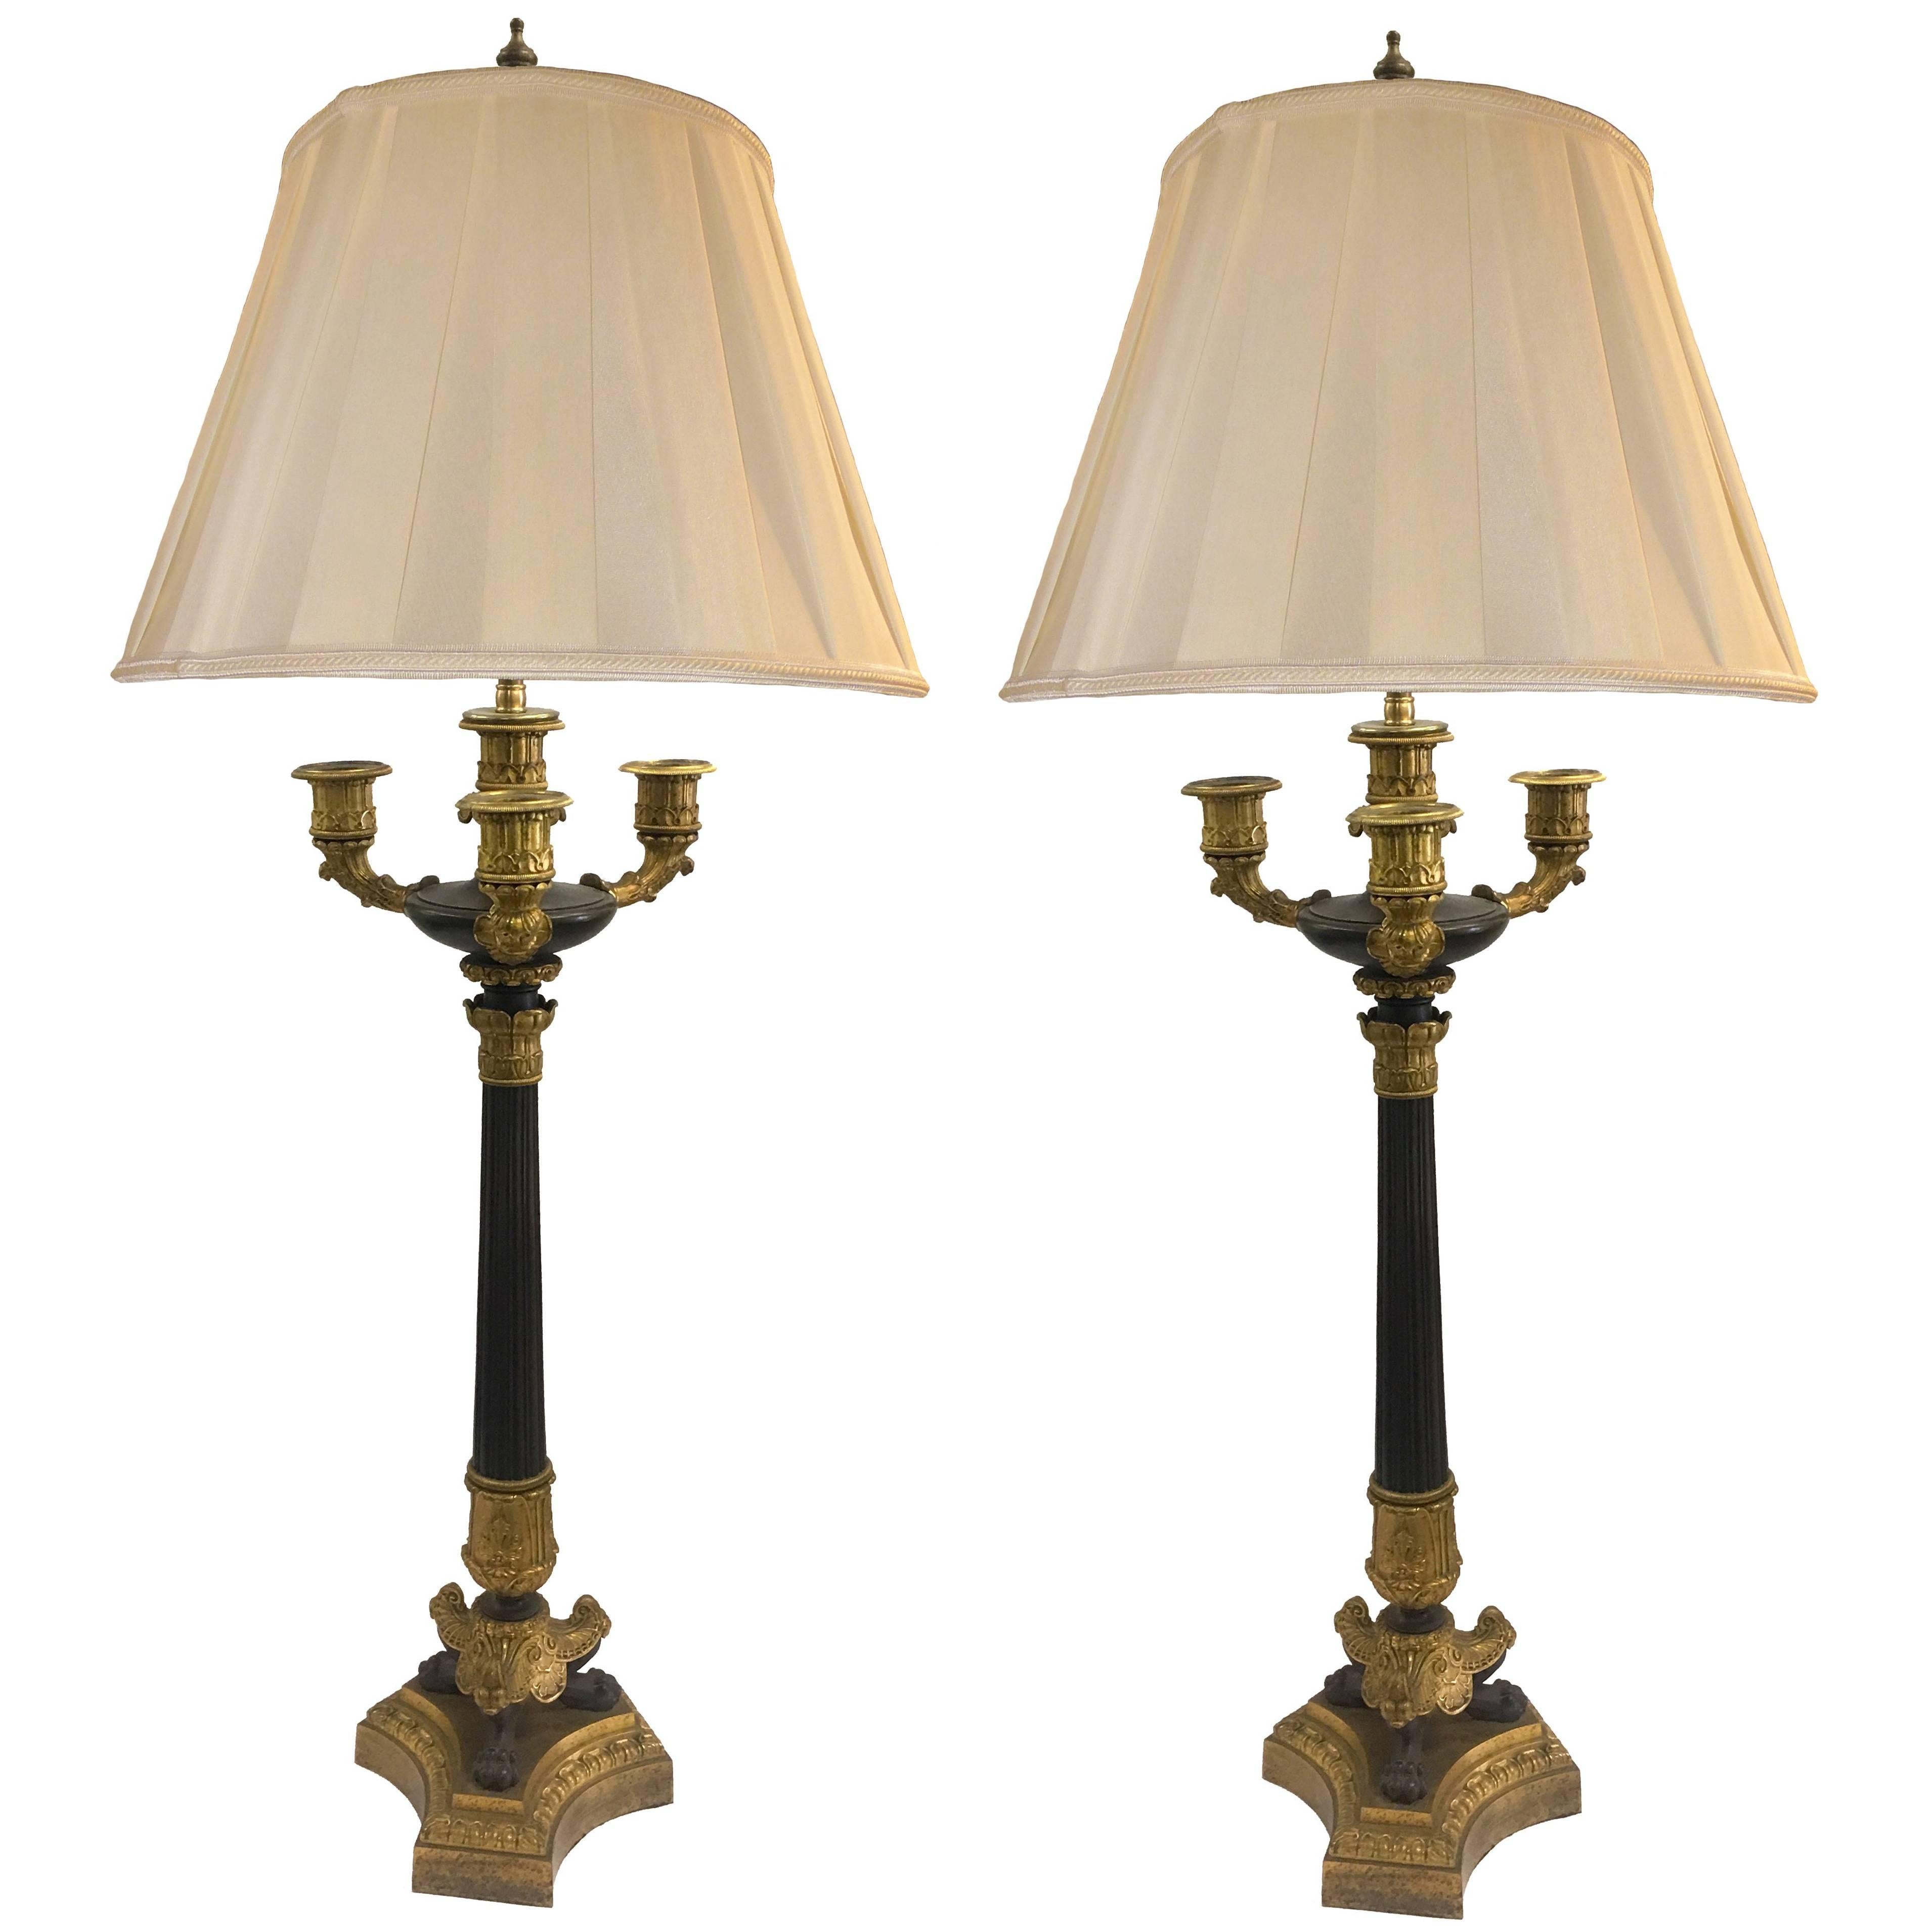 19th Century French Empire Candelabra Lamps, Pair